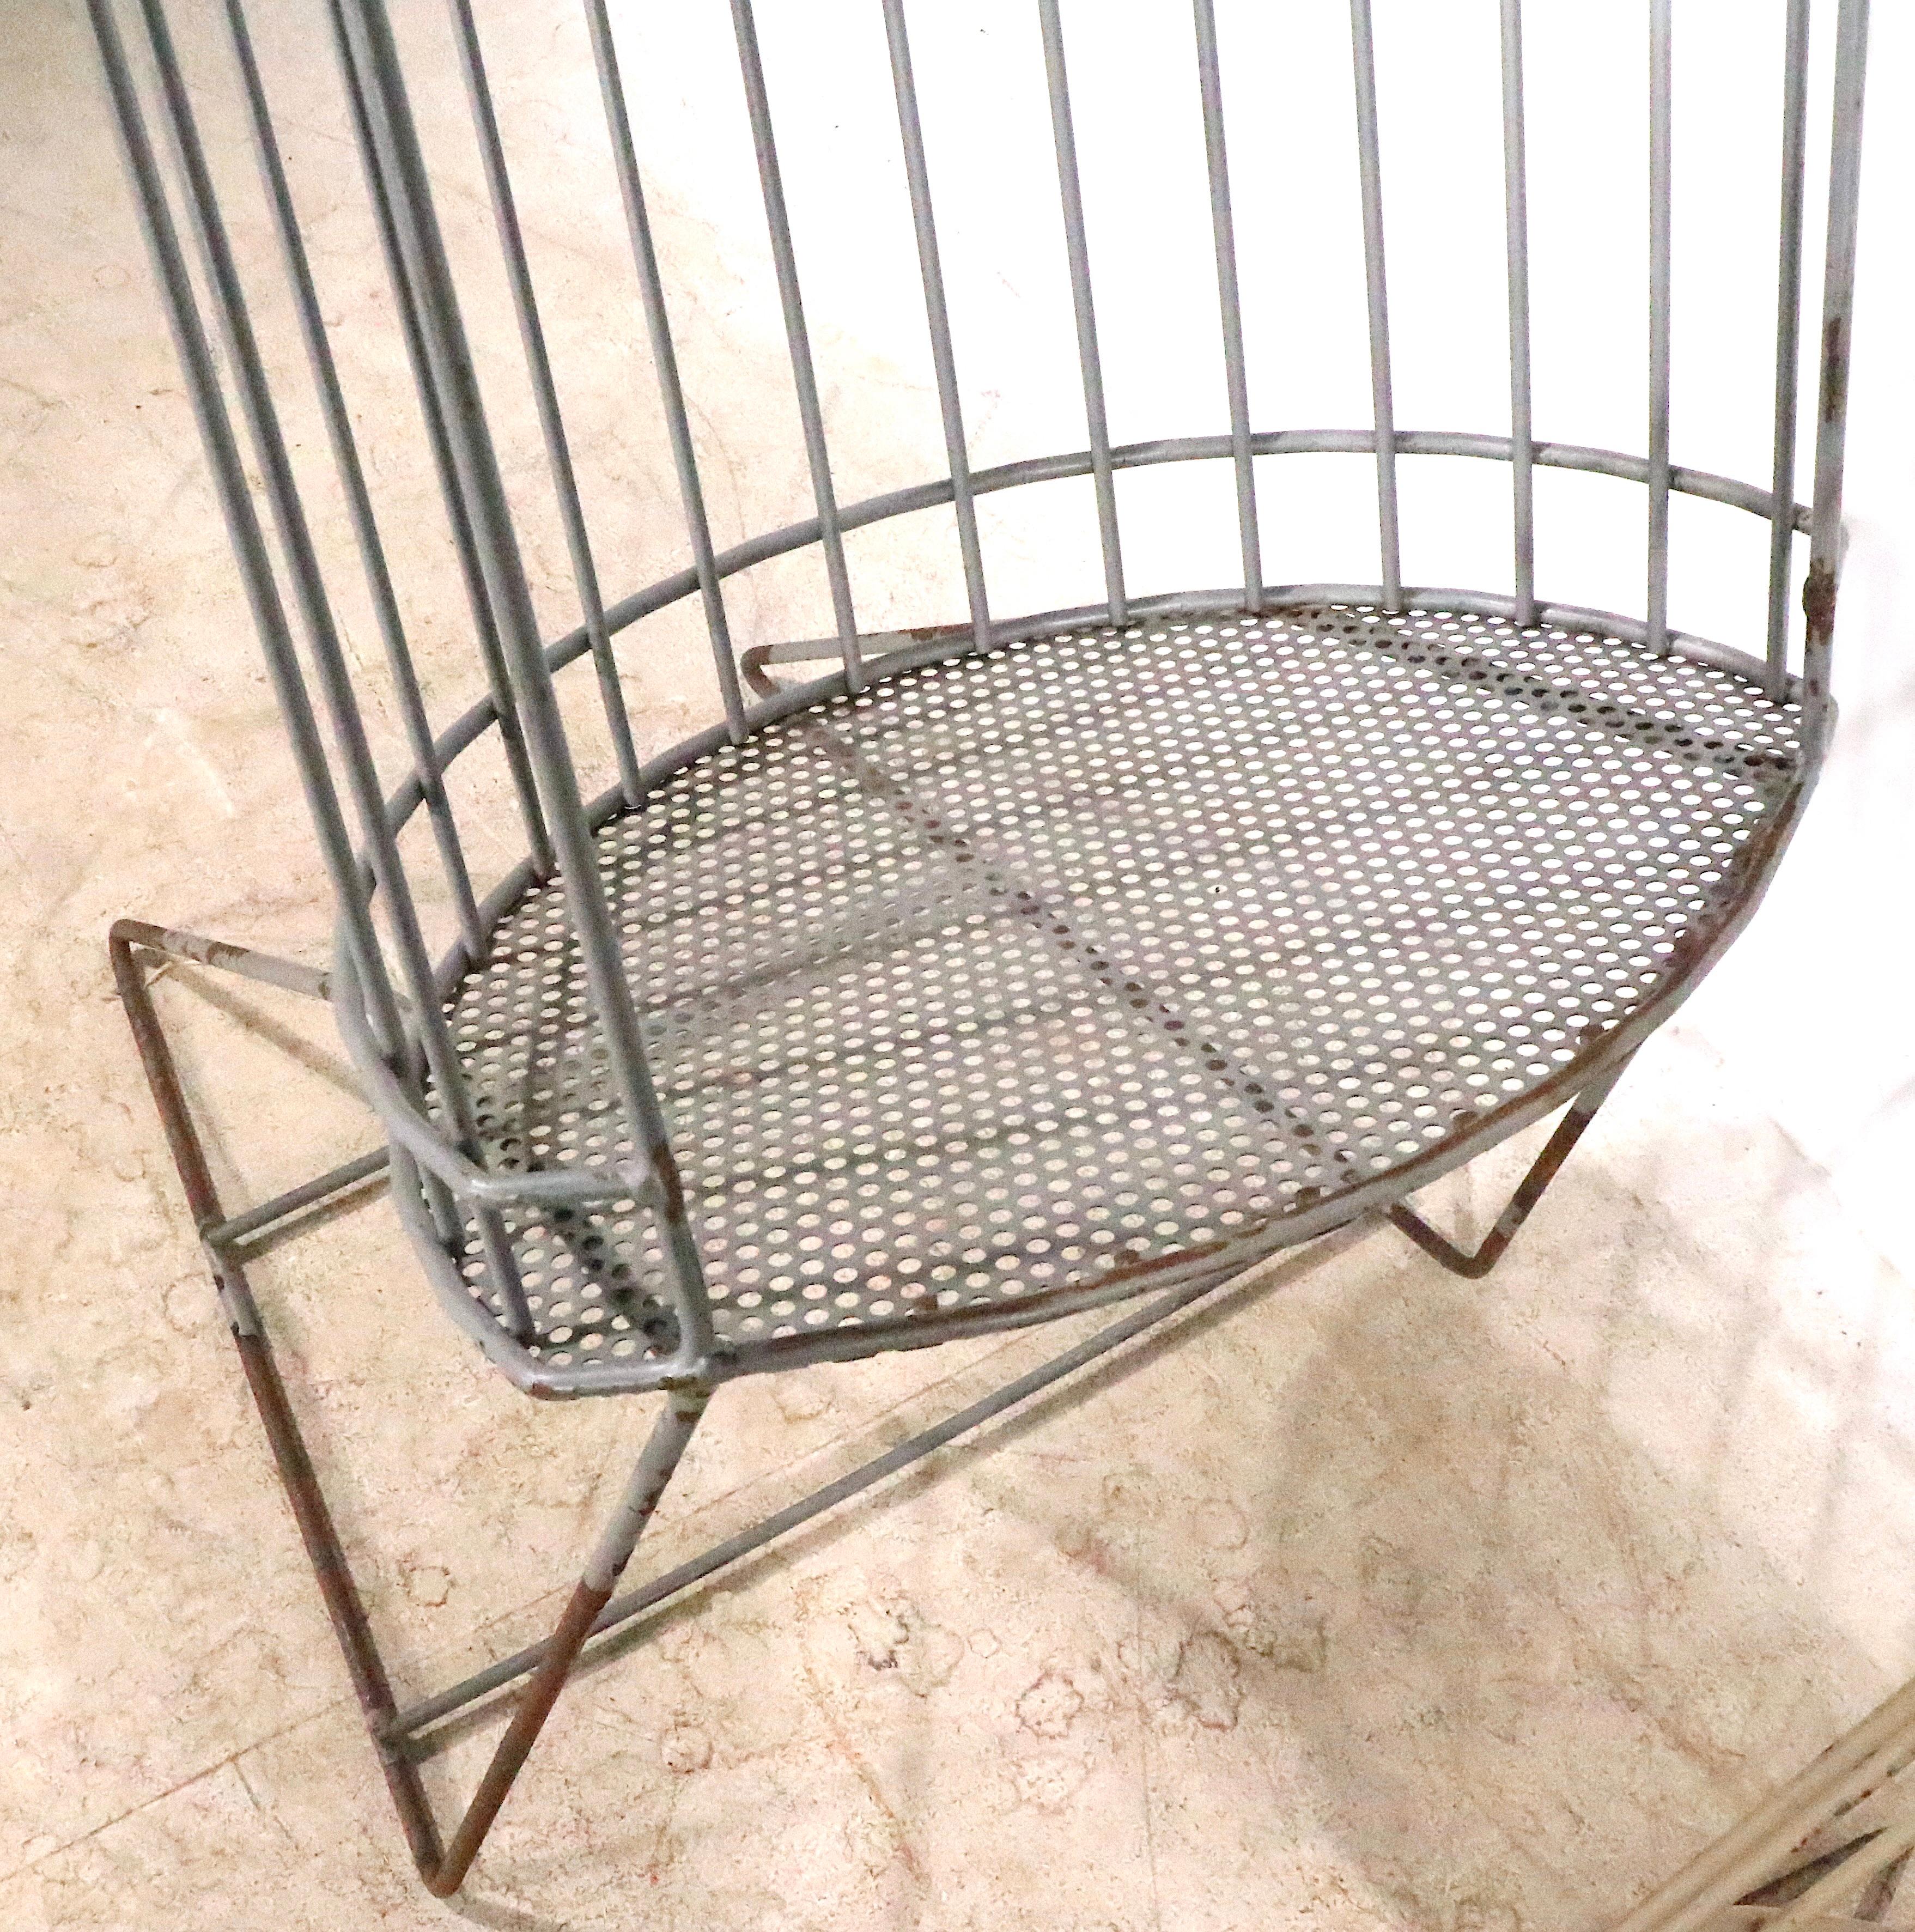 Architectural Mid Century store display stands constructed of welded iron rods, with an eye shaped bottom shelf of perforated metal.  The oval body is canted back, and has an open front to access the items within. The body rests on angled rod legs,